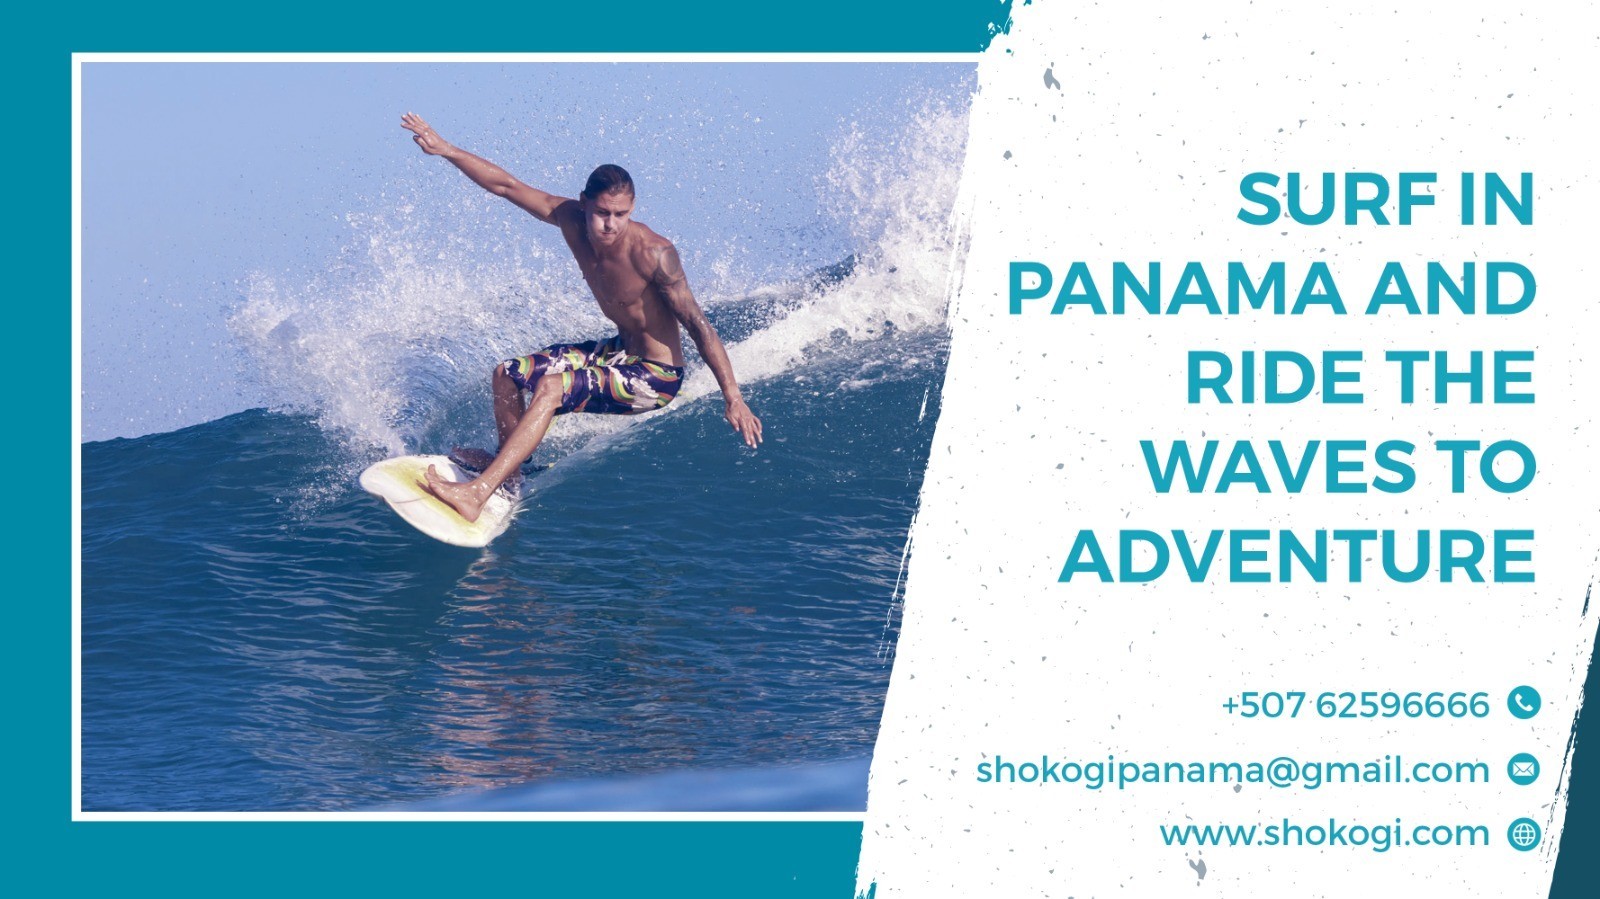 SURF IN PANAMA AND RIDE THE WAVES TO ADVENTURE